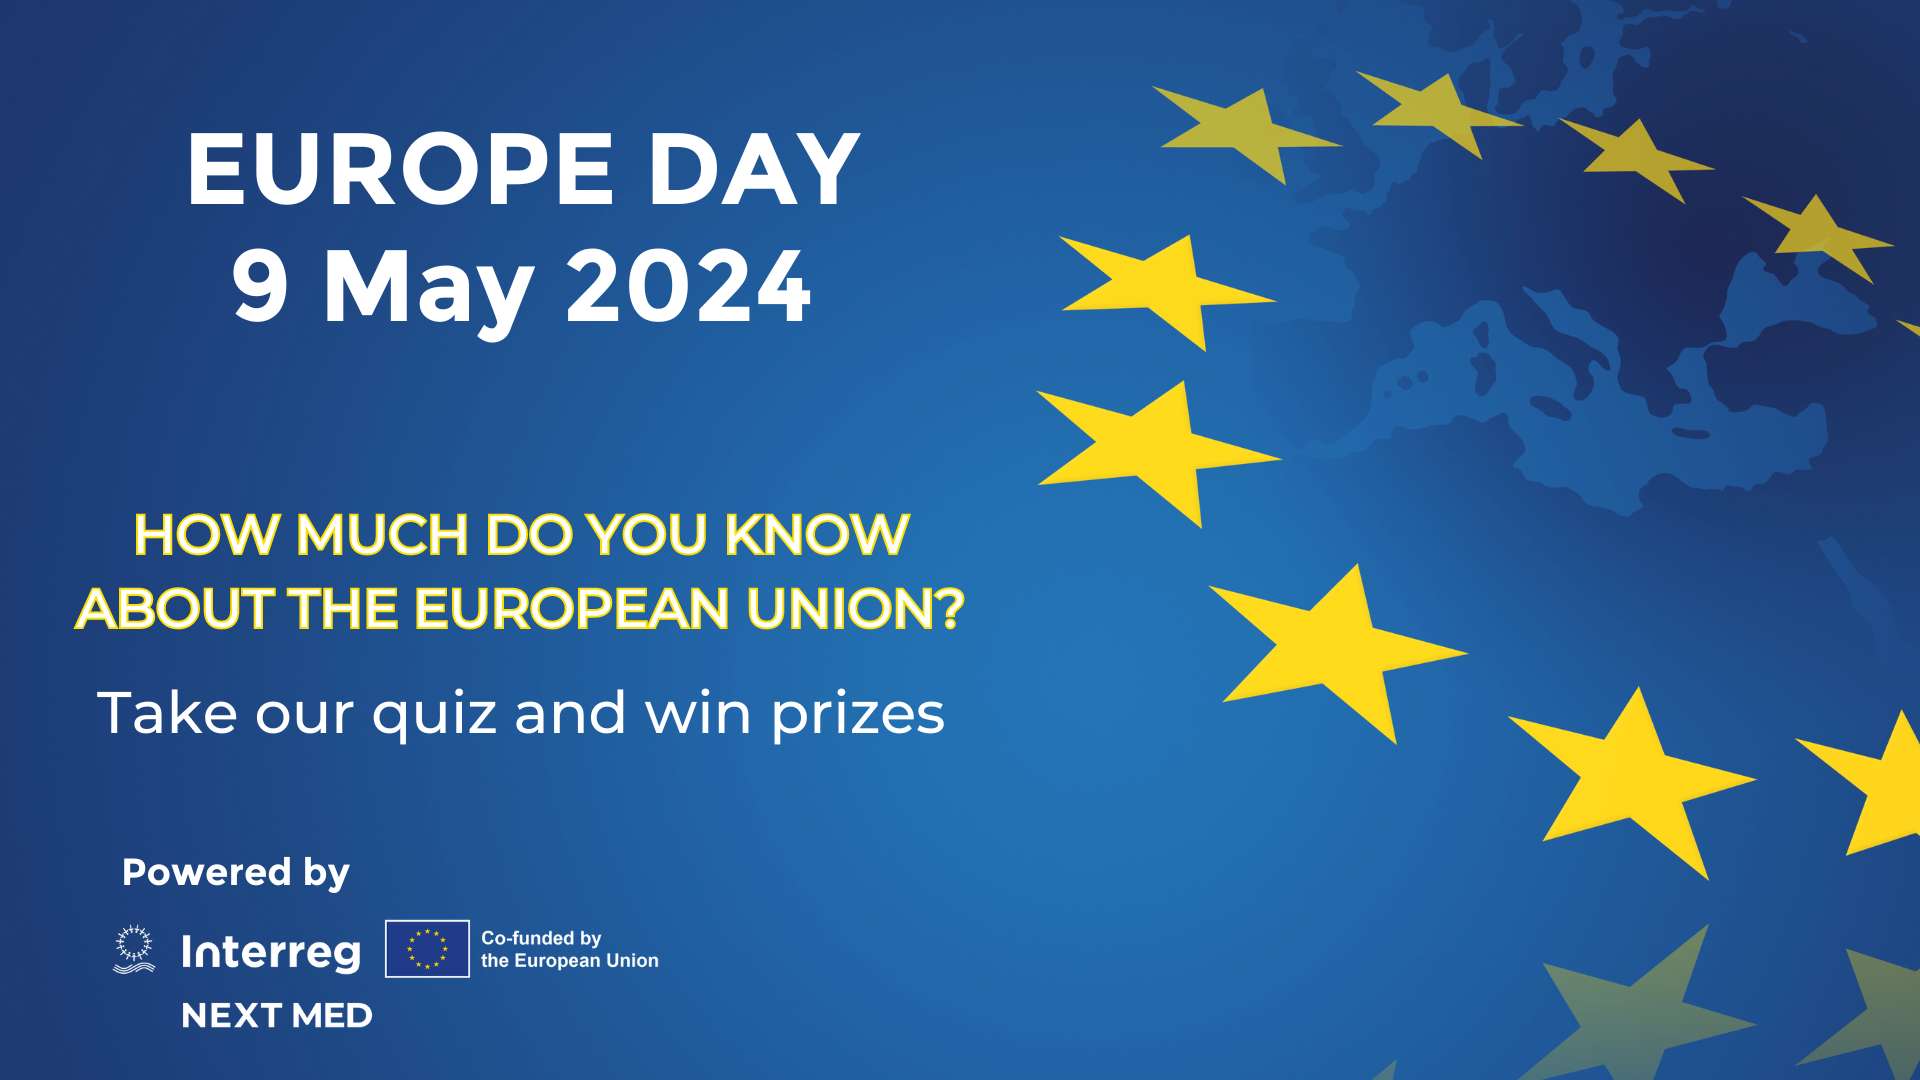 Europe Day: Take our Quiz and Win Prizes